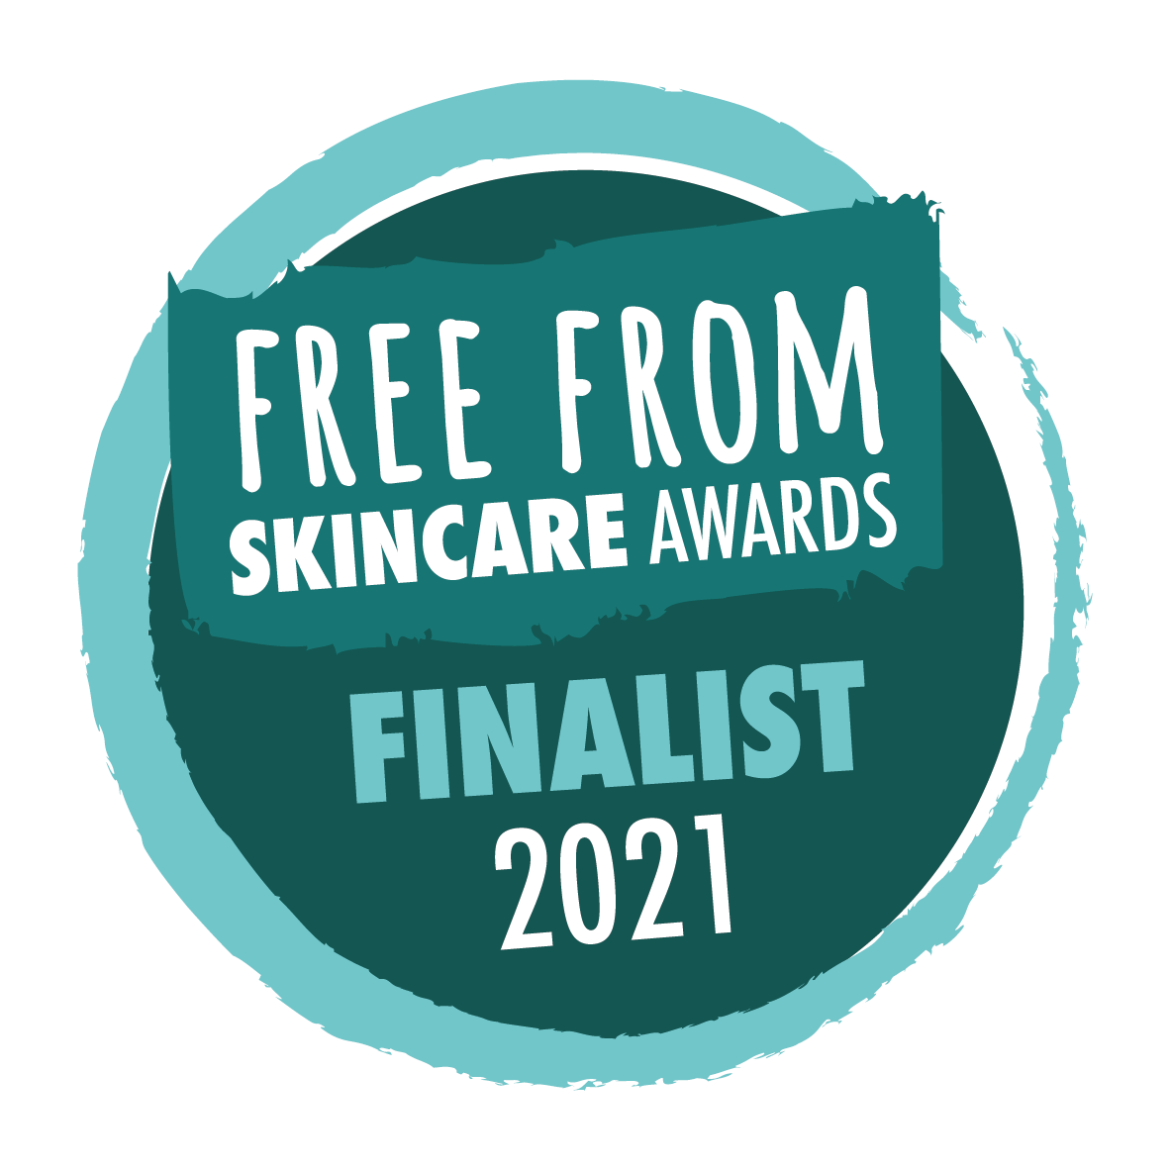 The 2021 Free From Skincare Awards Finalists are Announced! Skins Matter